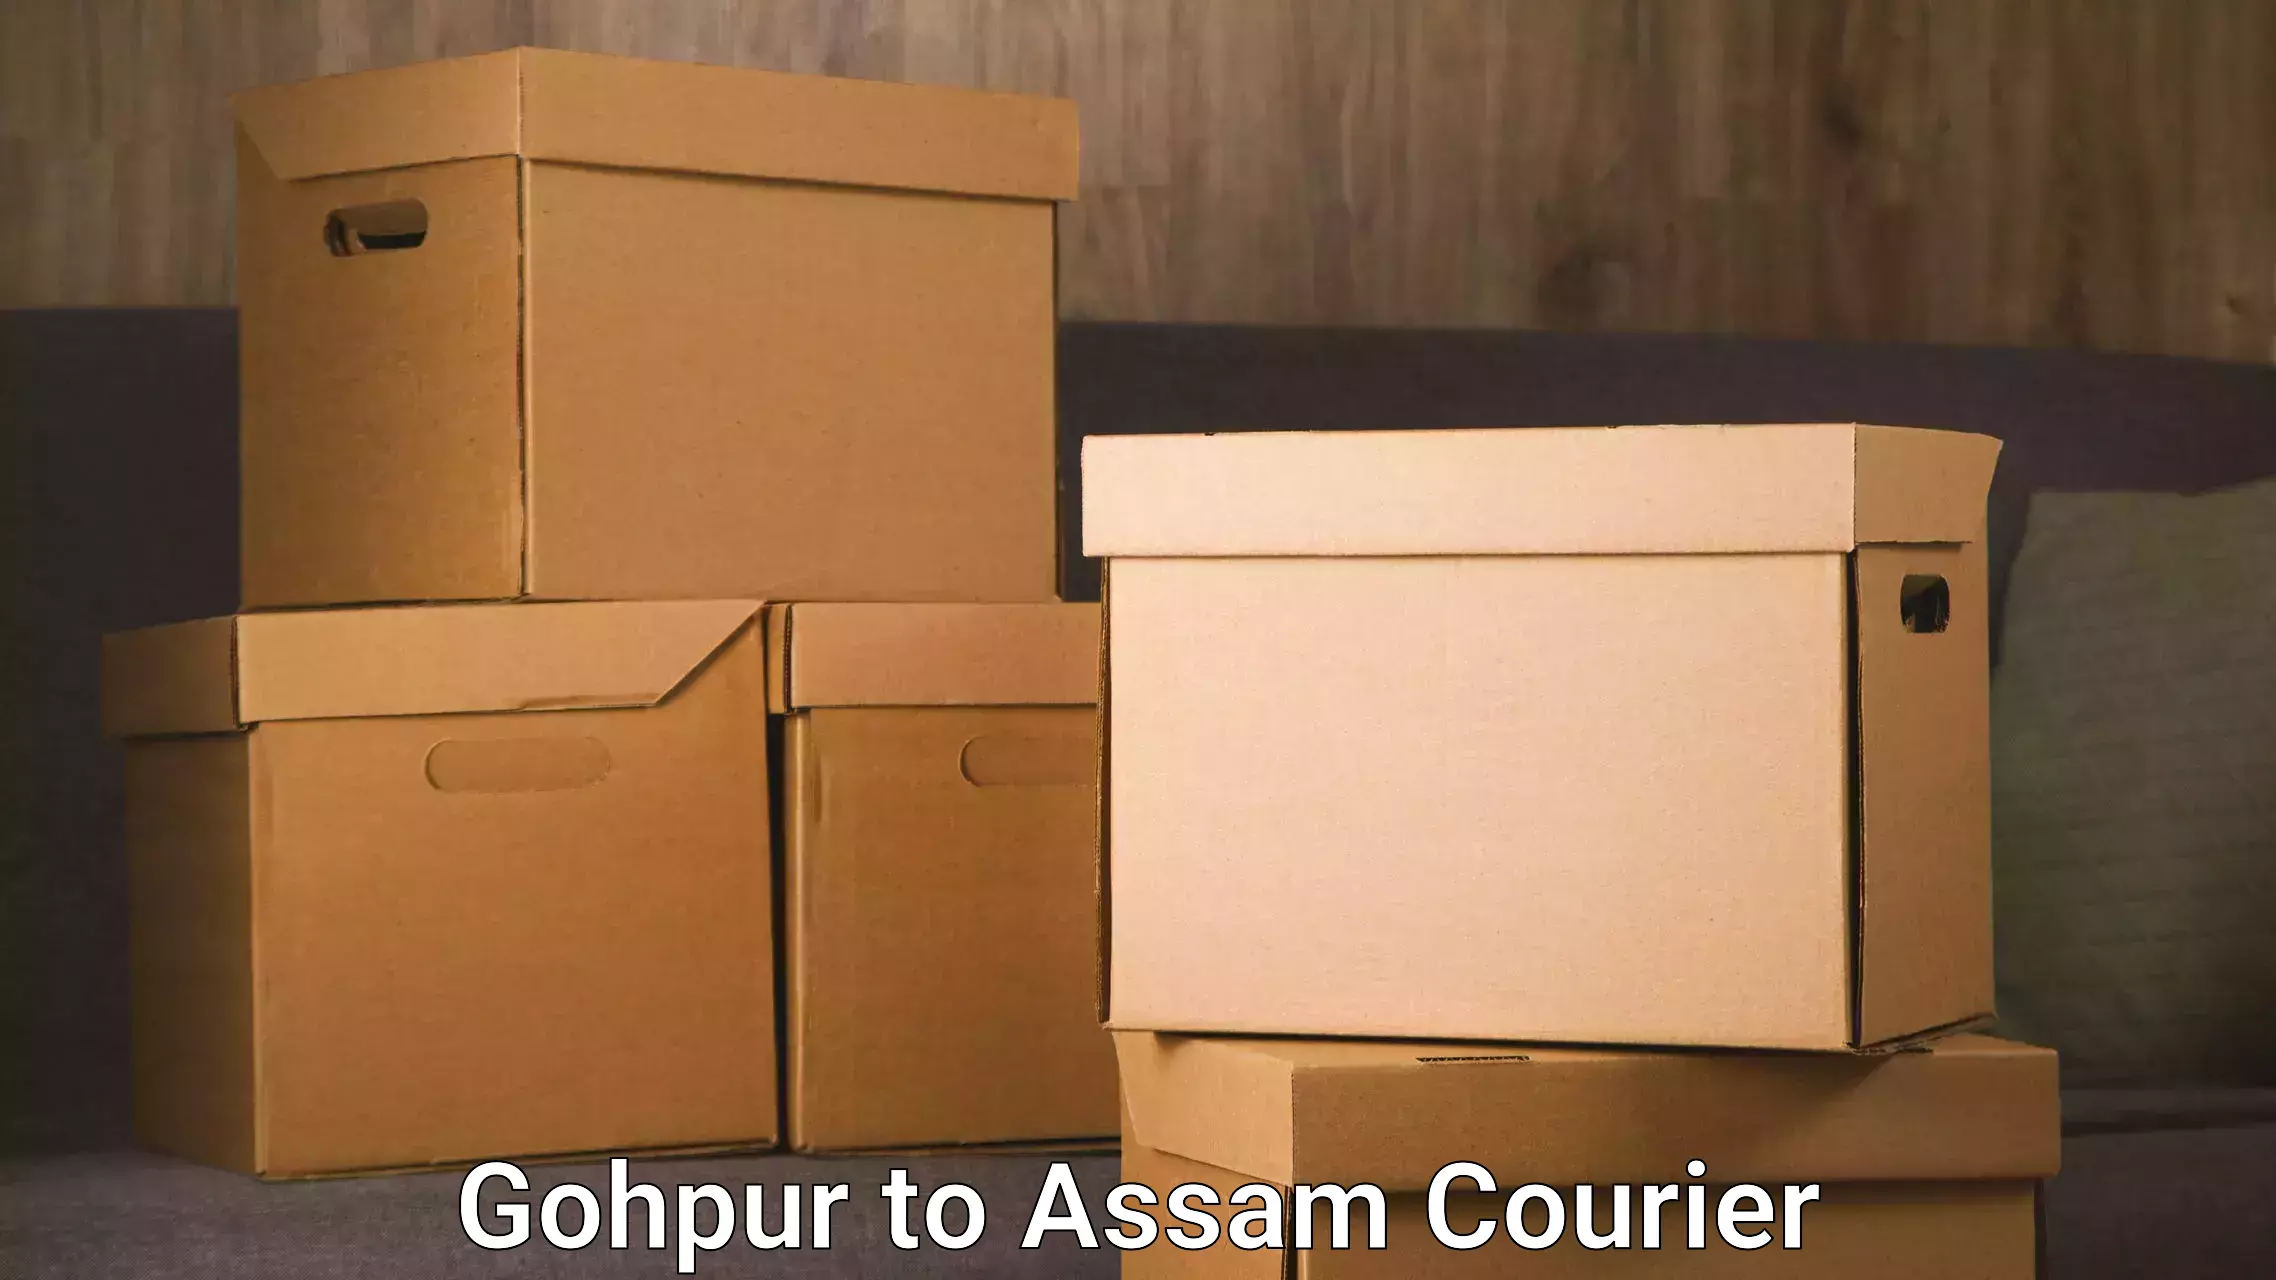 Advanced tracking systems Gohpur to Assam